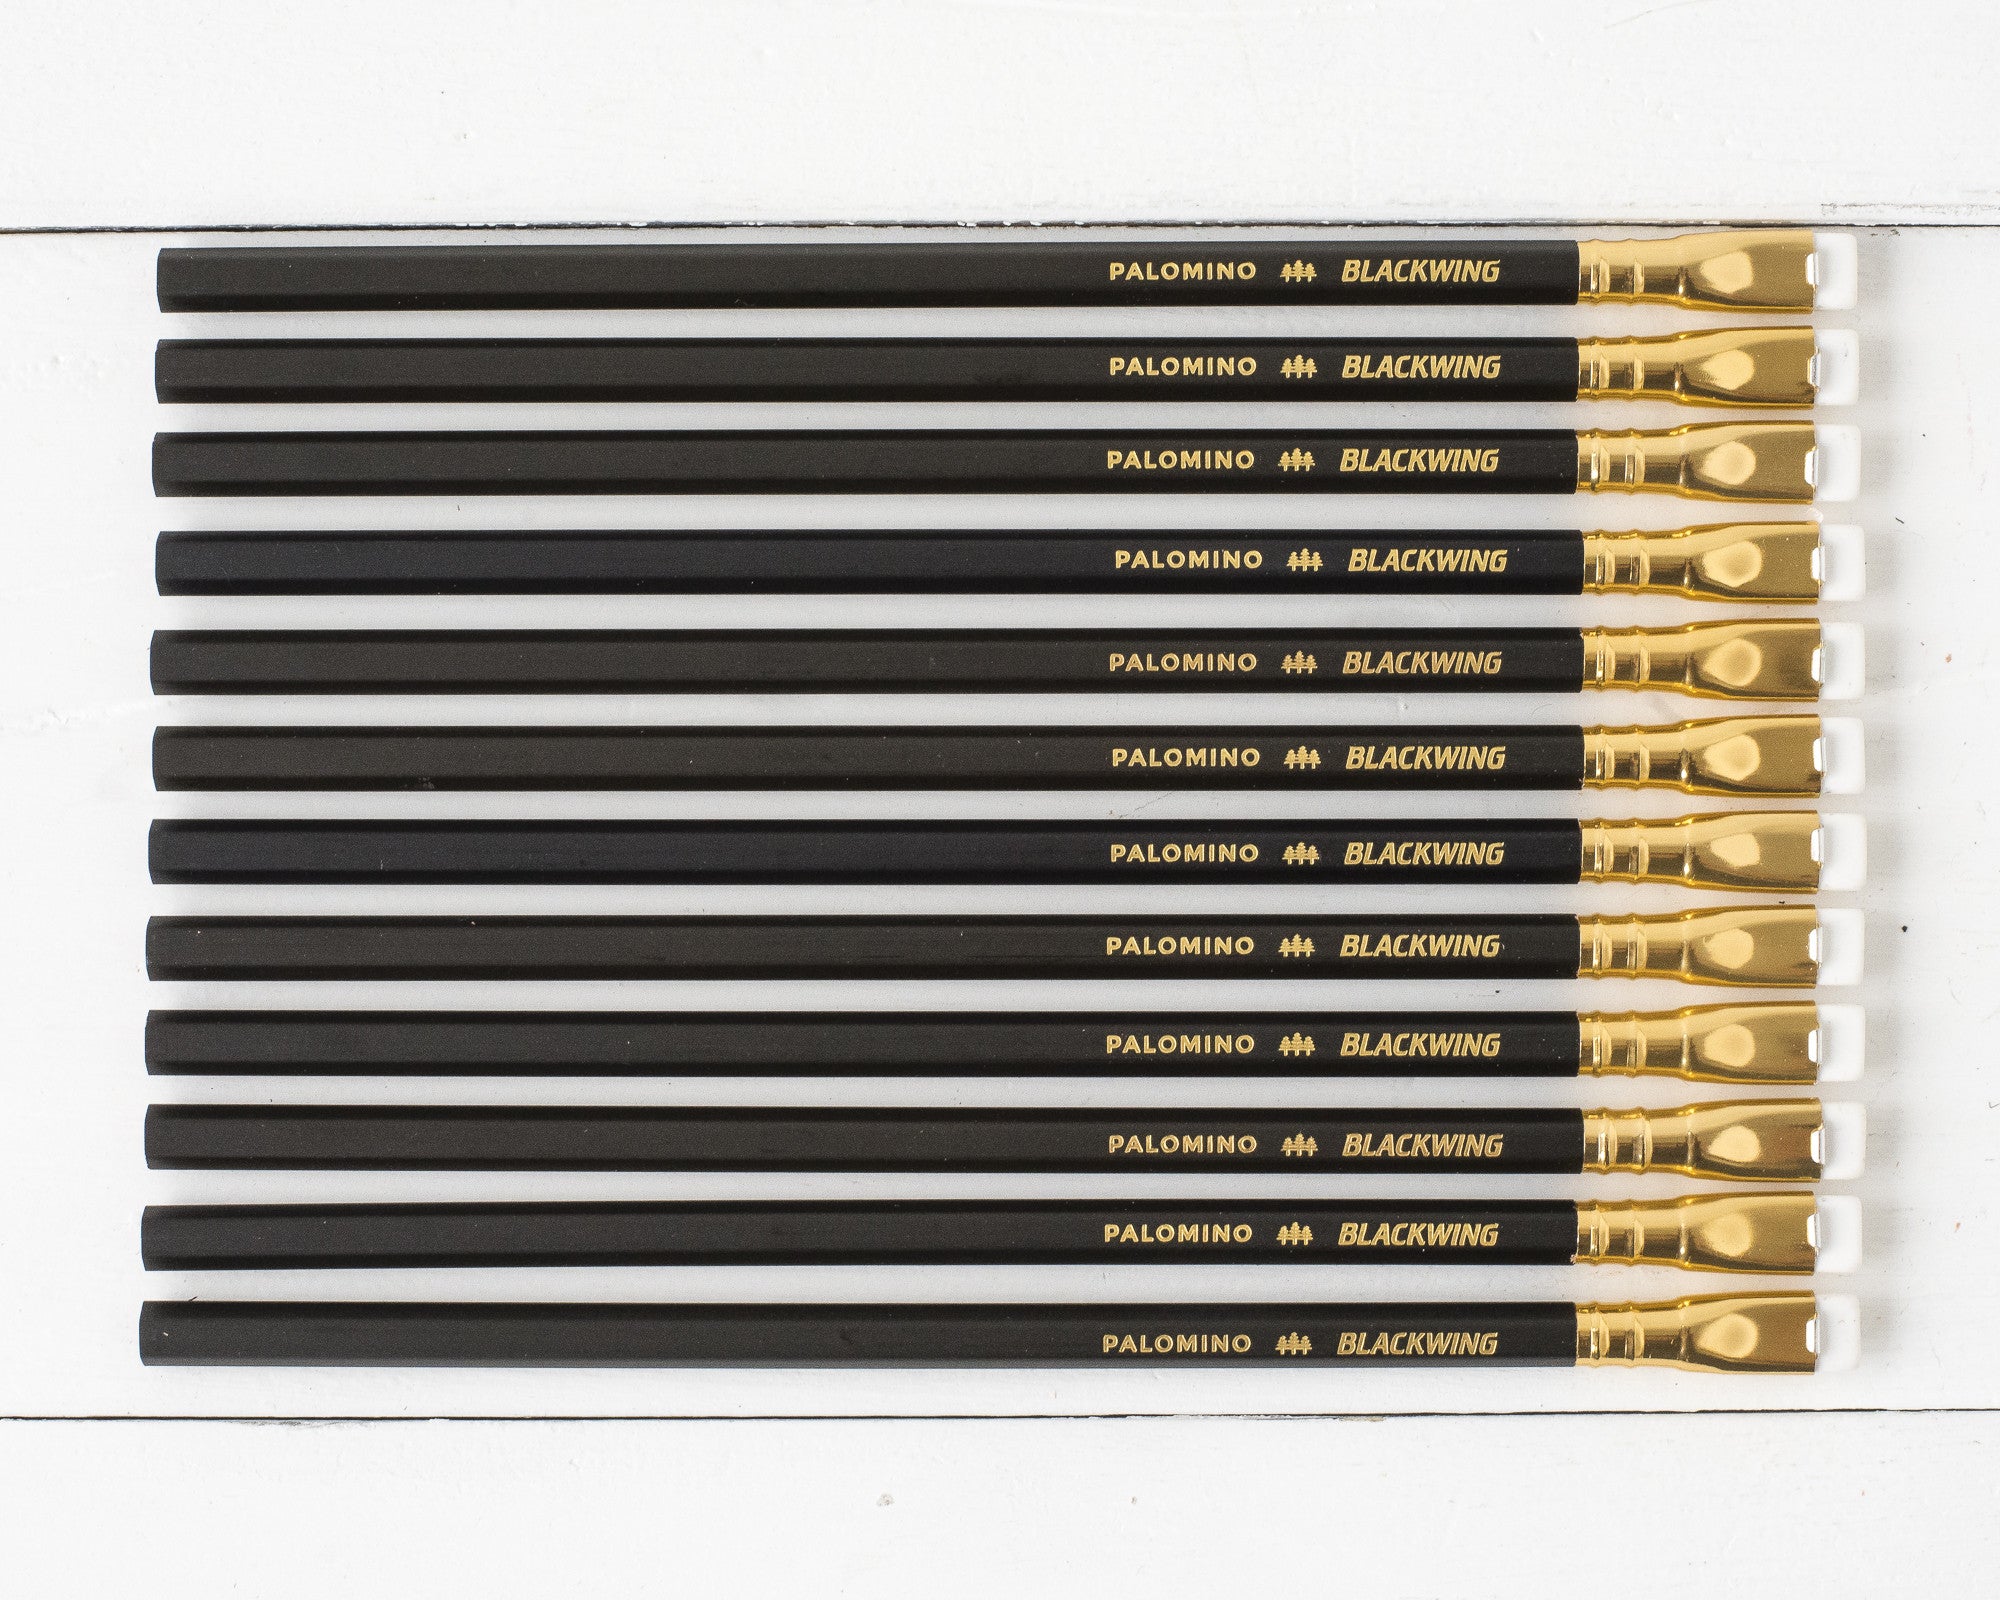 A collection of Blackwing Matte Pencil Set of 12 pencils arranged in parallel on a white surface.